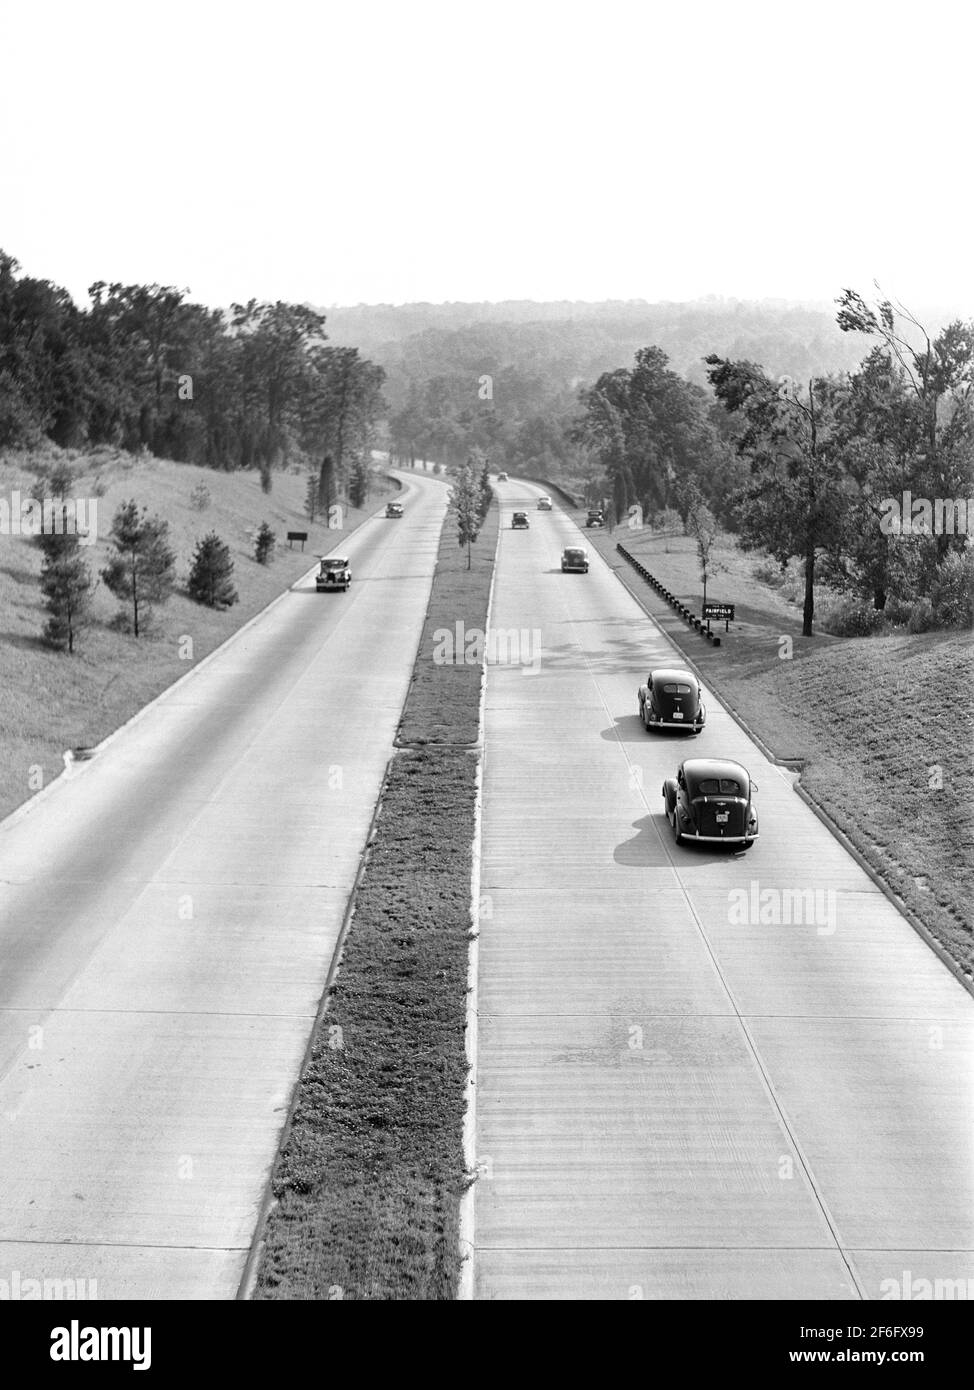 Merritt Parkway to New Haven, Fairfield, Connecticut, USA, Marion Post Wolcott, U.S. Farm Security Administration Stock Photo